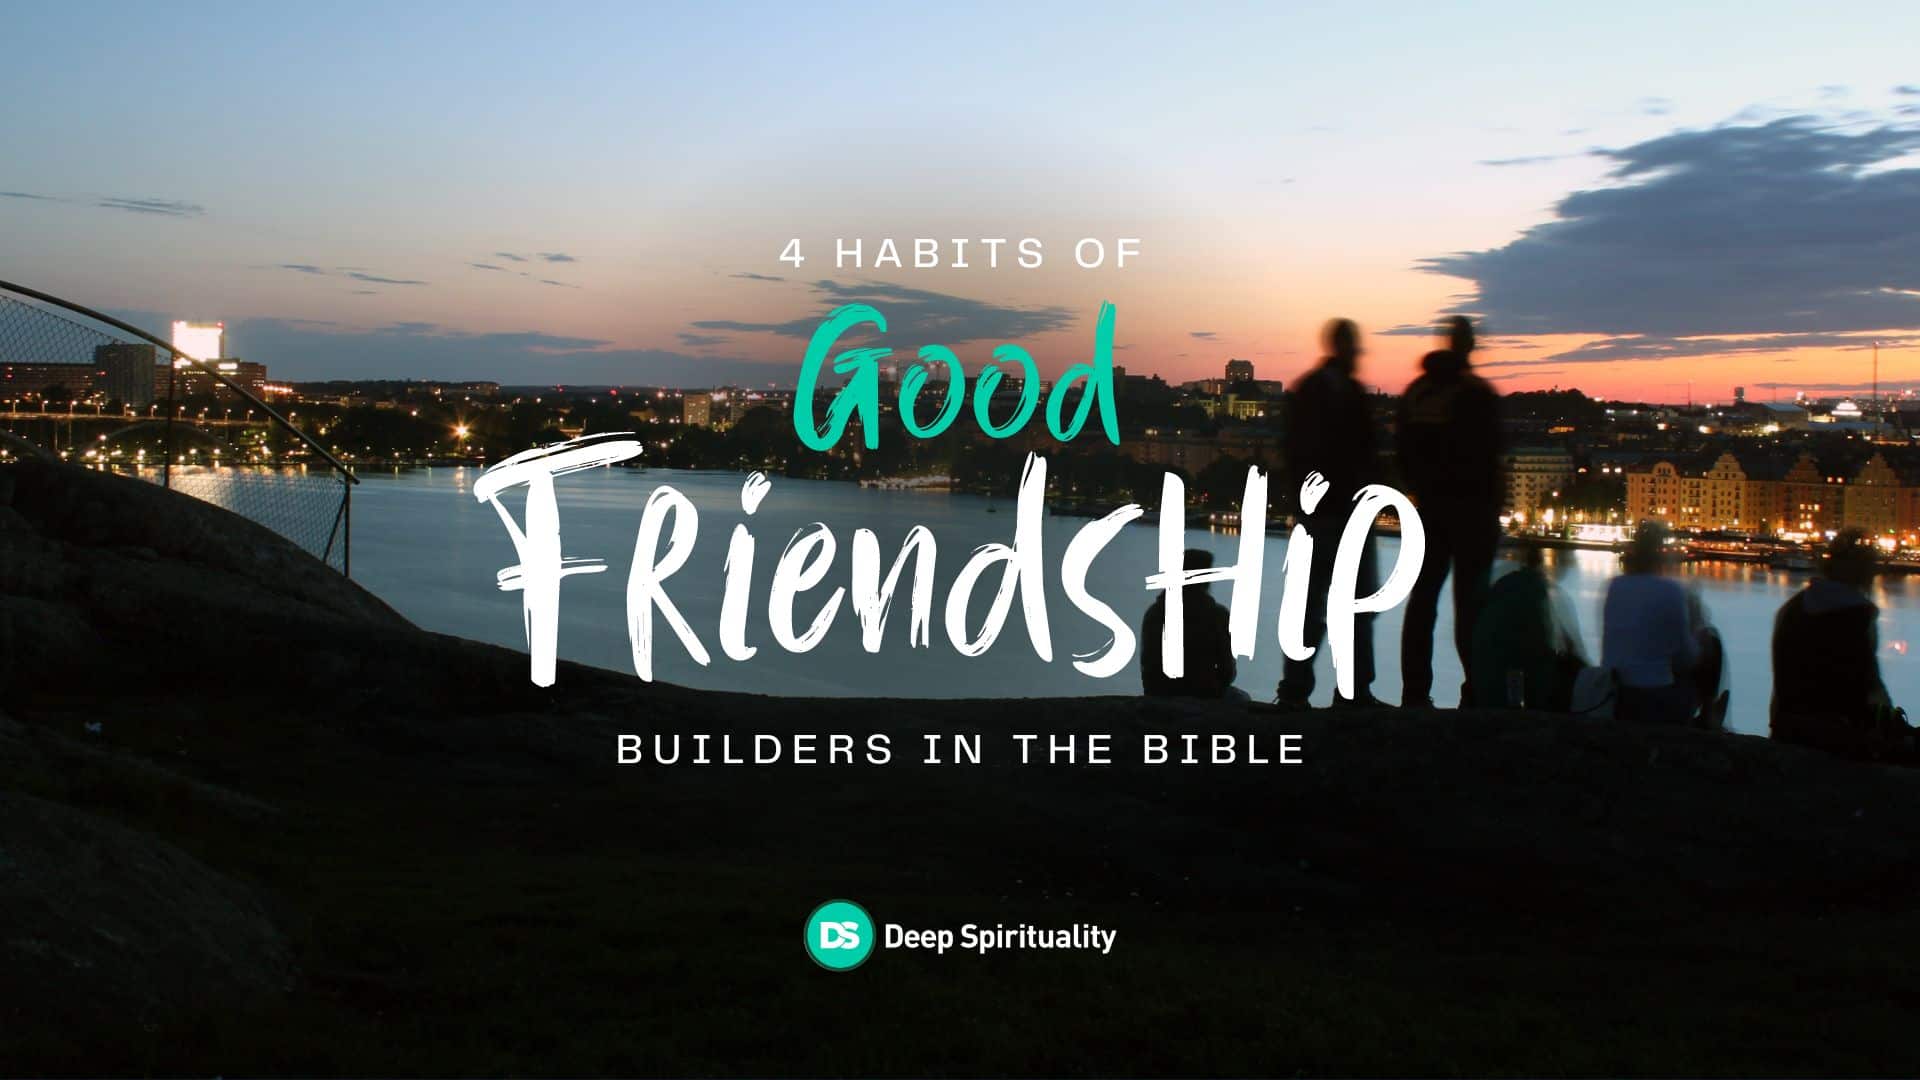 4 Habits to Build if You Want Good Friendships, According to the Bible 5